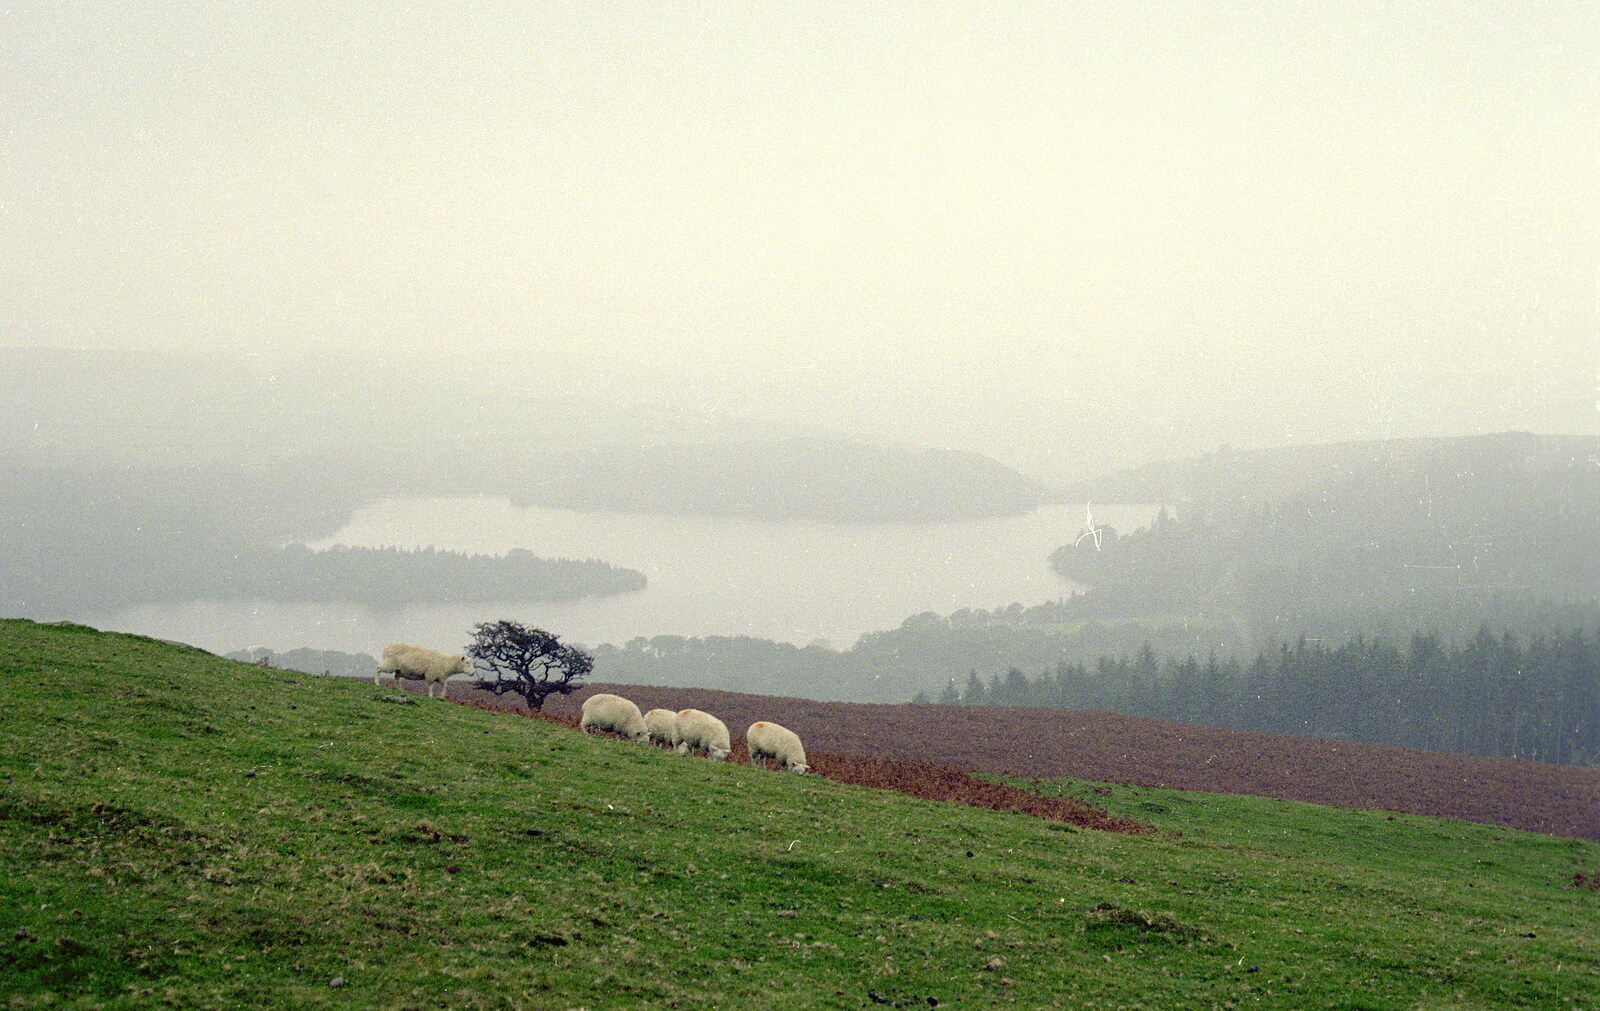 Dartmoor sheep from Uni: First Weeks At Polytechnic, Umbrellas and a Visit From Liz, Plymouth - 26th September 1985